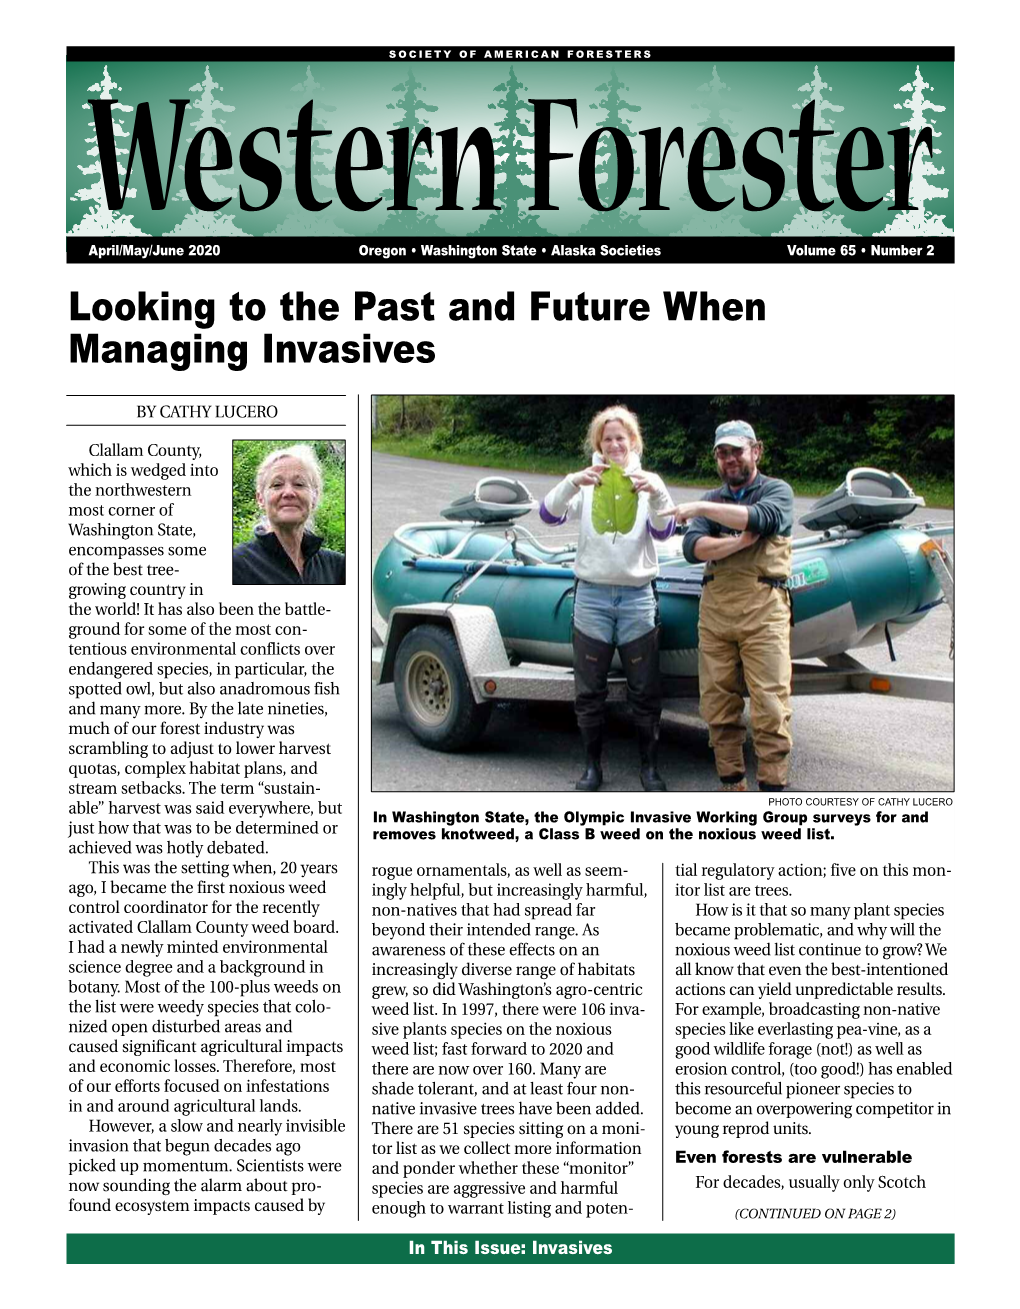 April/May/June 2020 Western Forester(PDF)